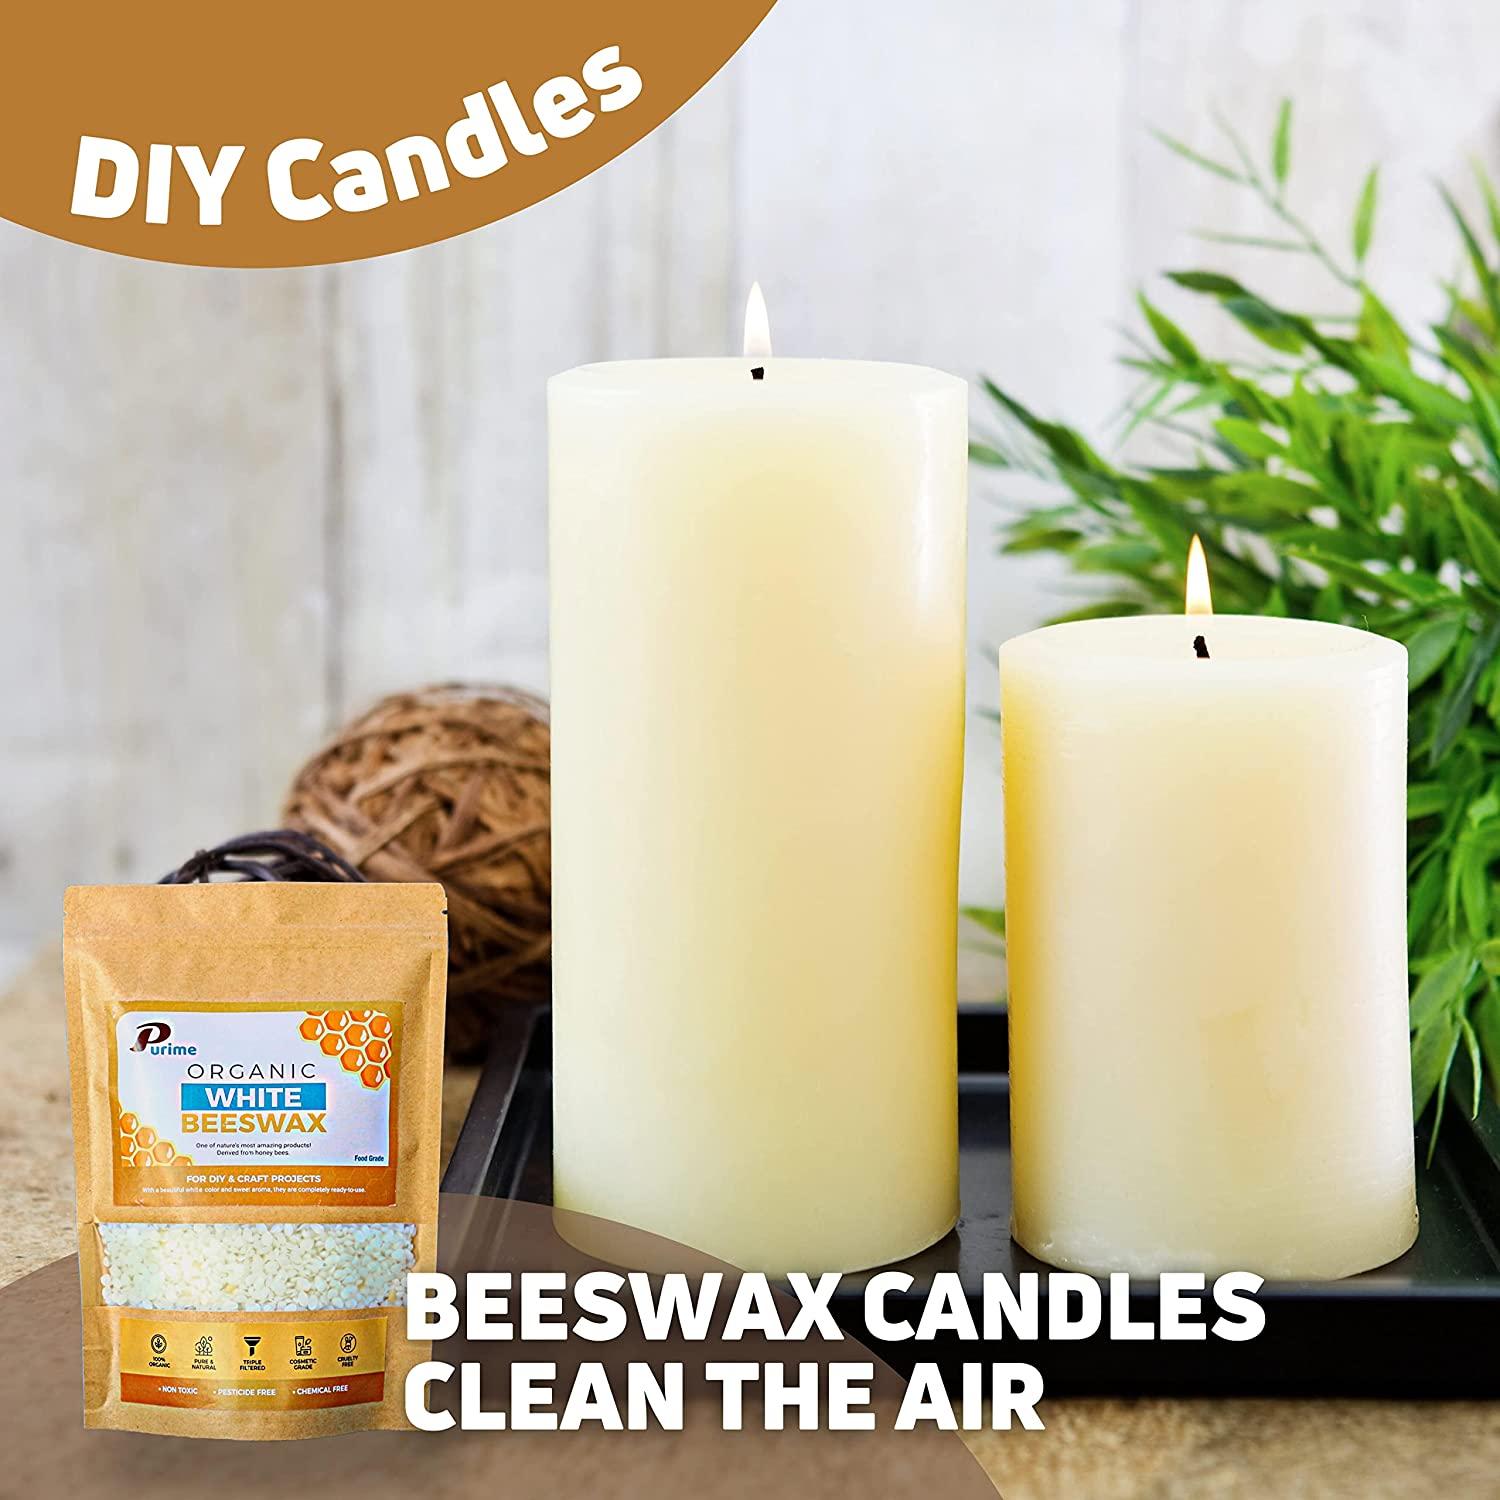 Organic Beeswax Pastilles, Candles & Beeswax